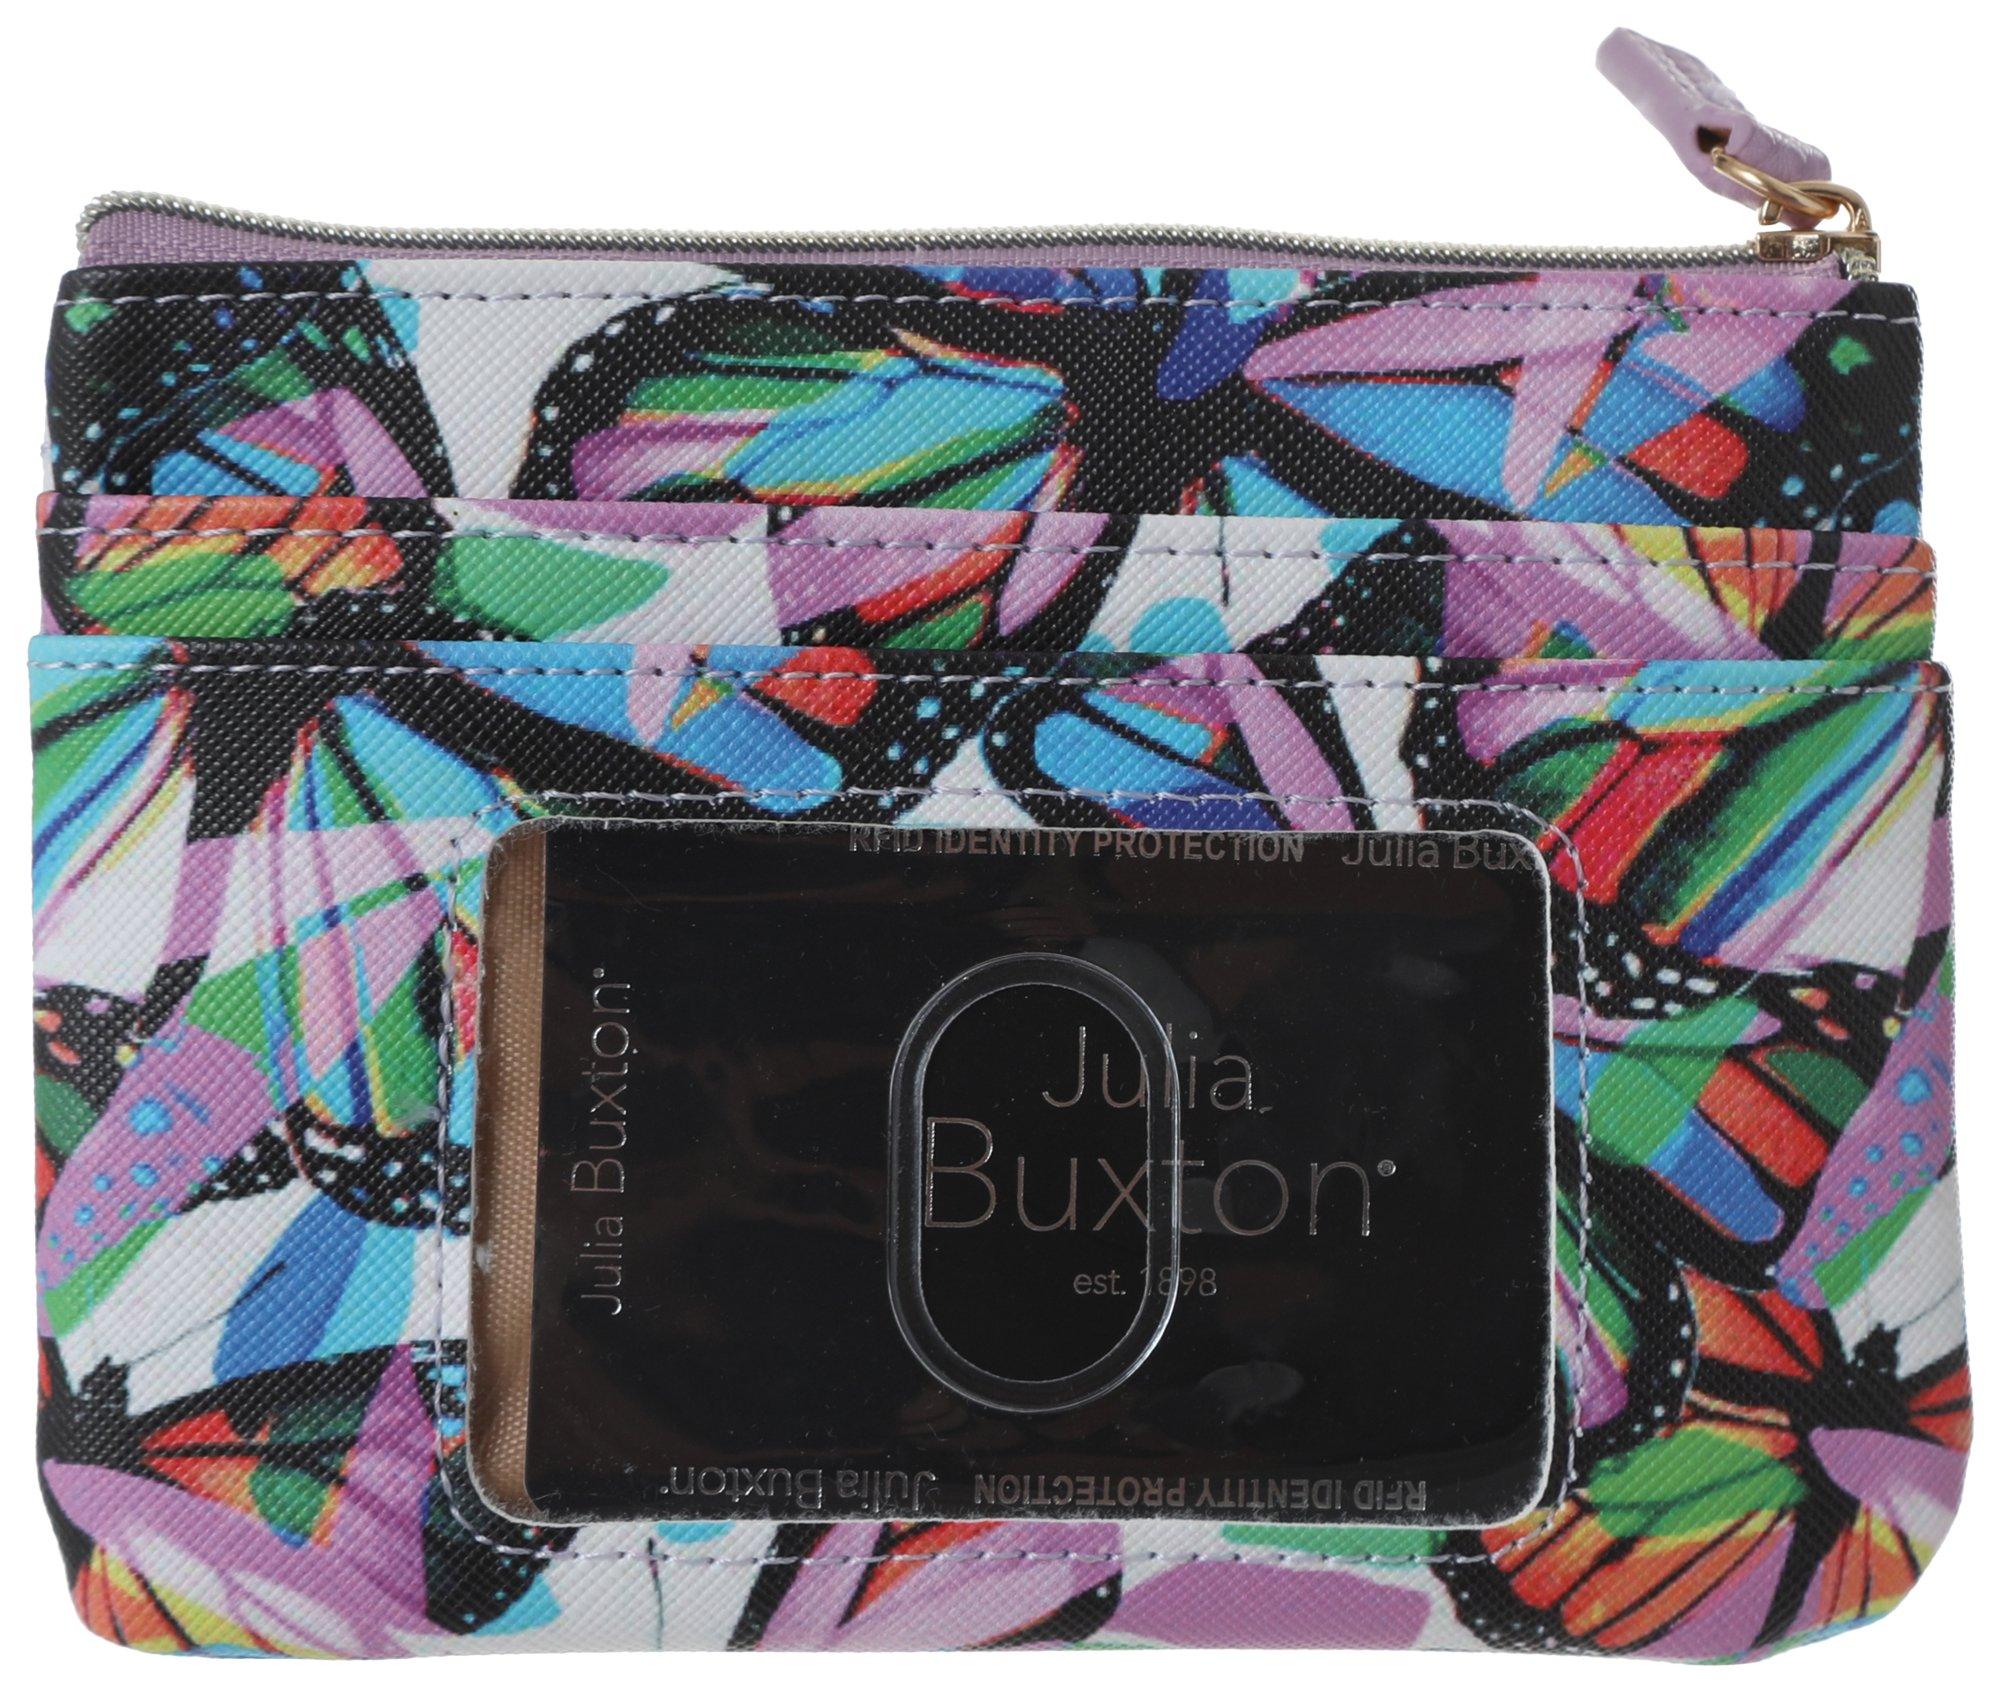 Butterfly Print Coin Pouch